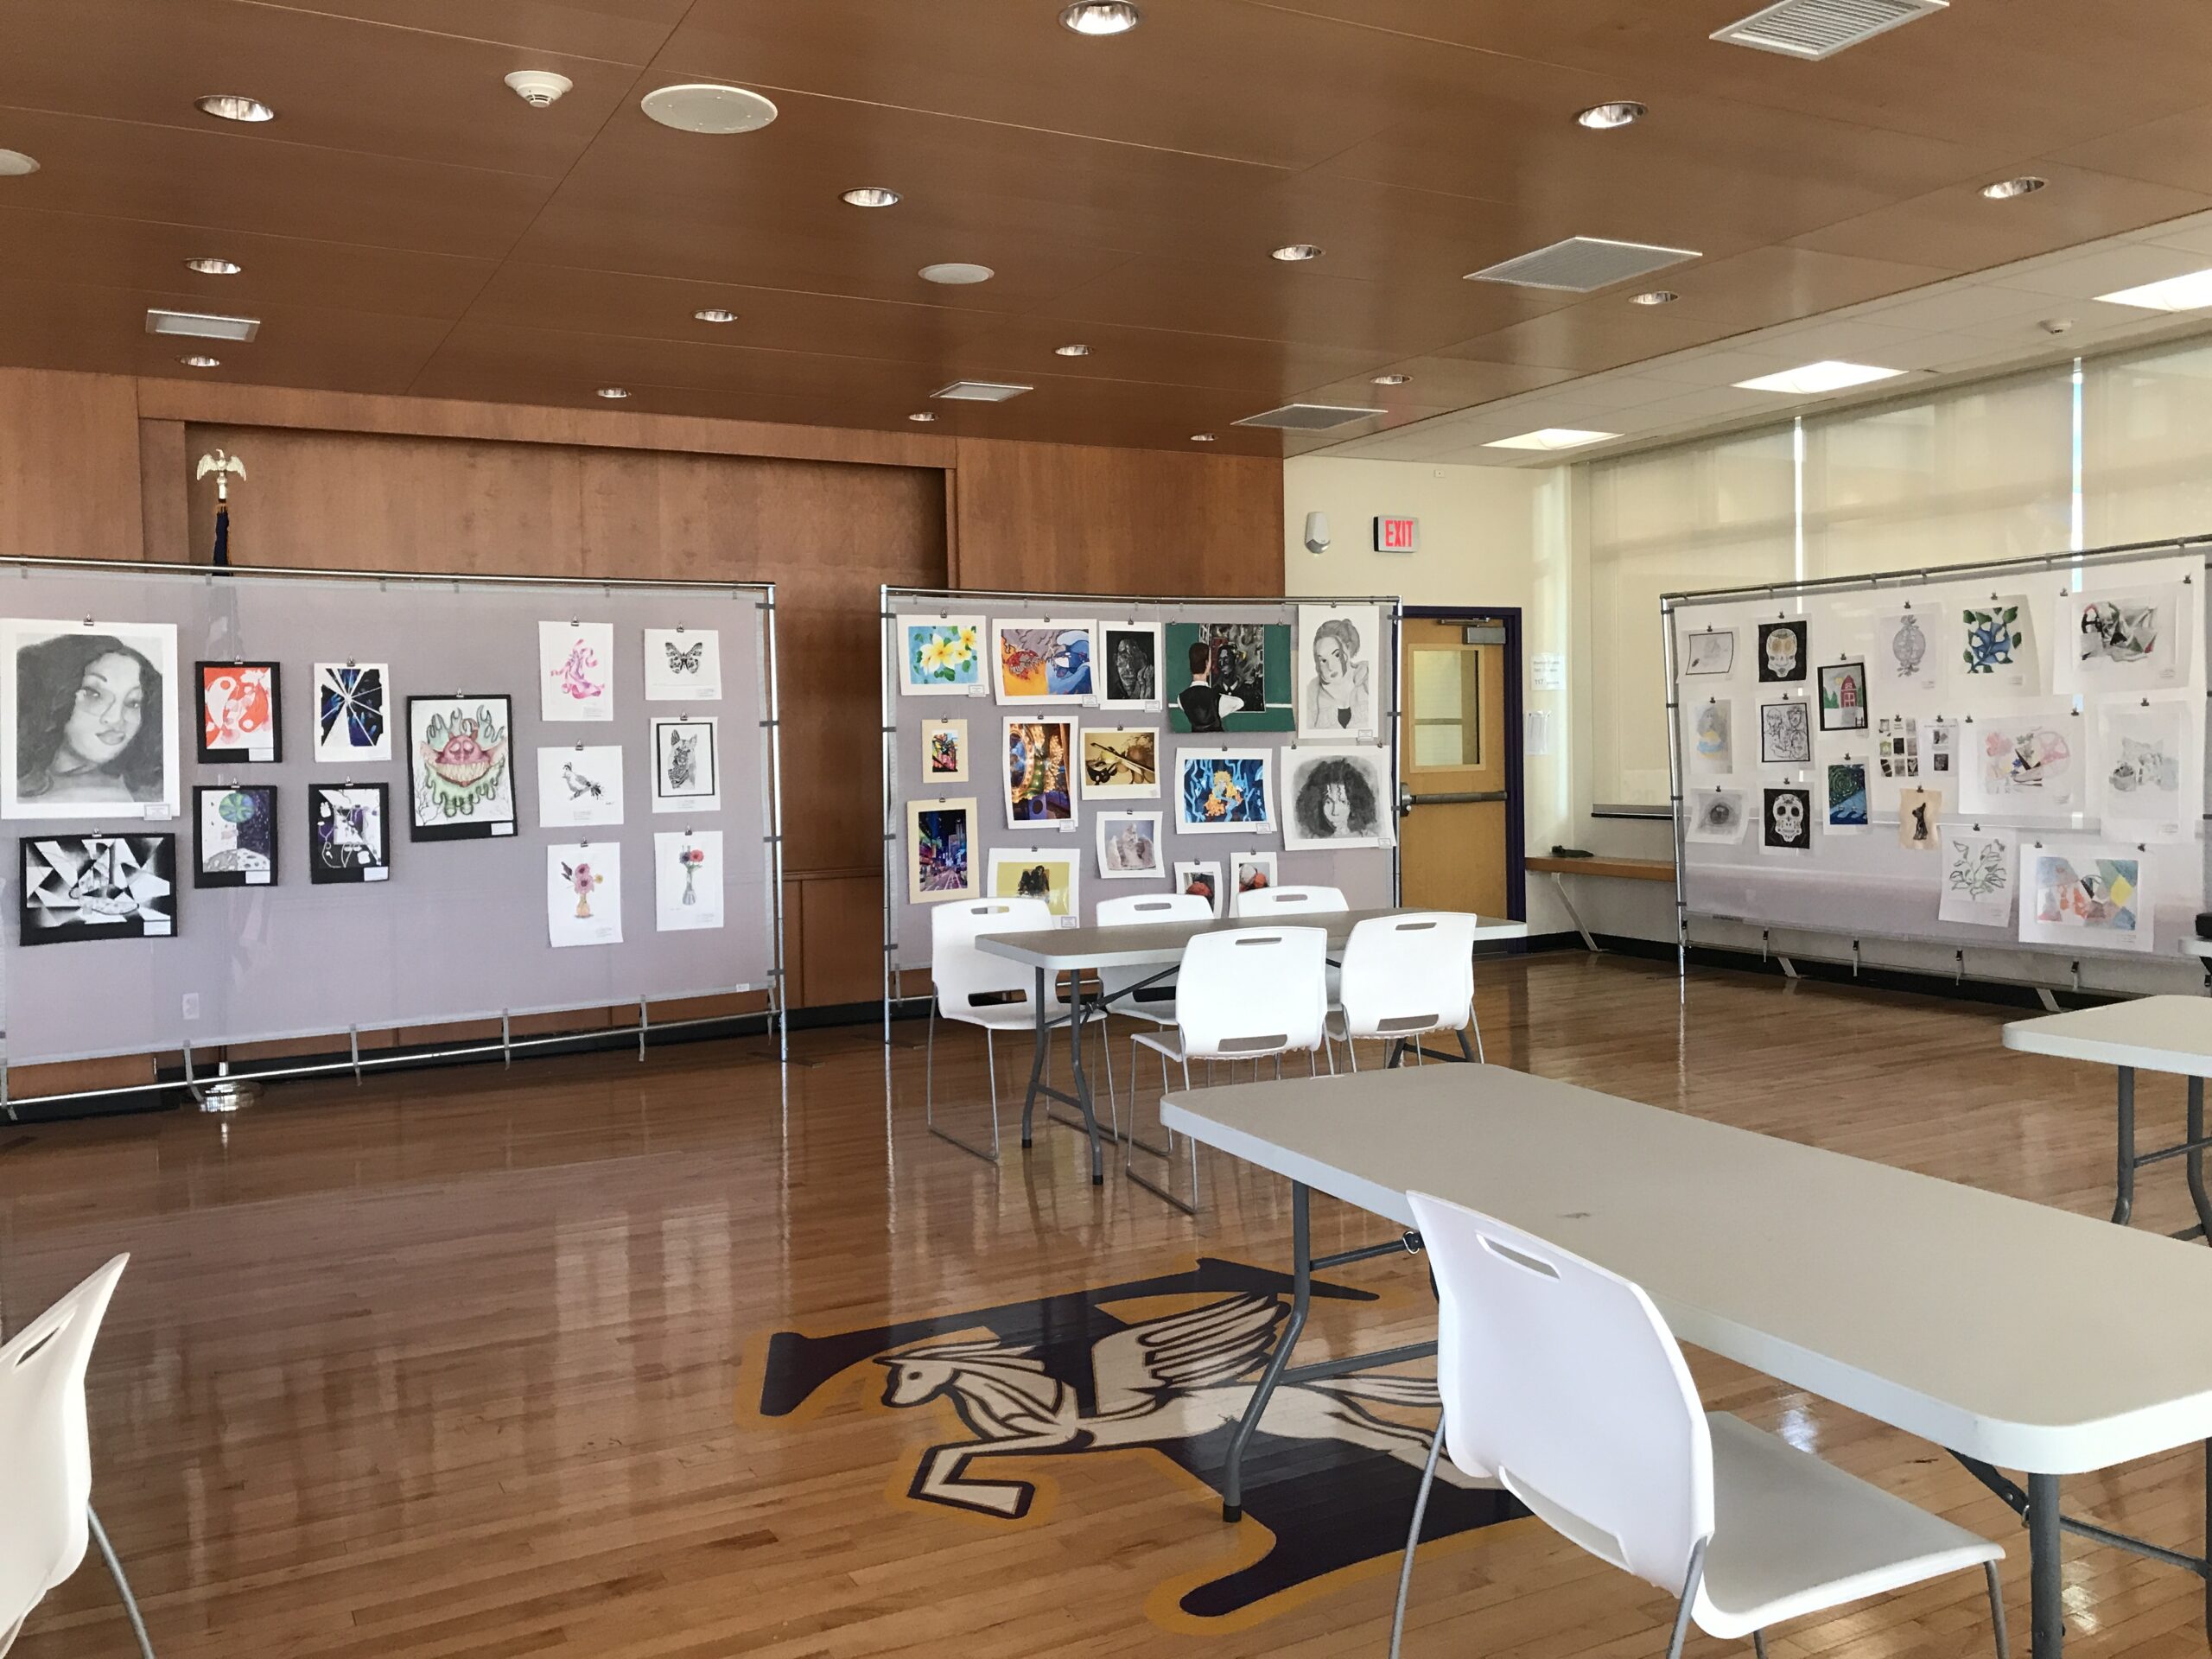 Student Artists Featured at BOE Art Exhibit